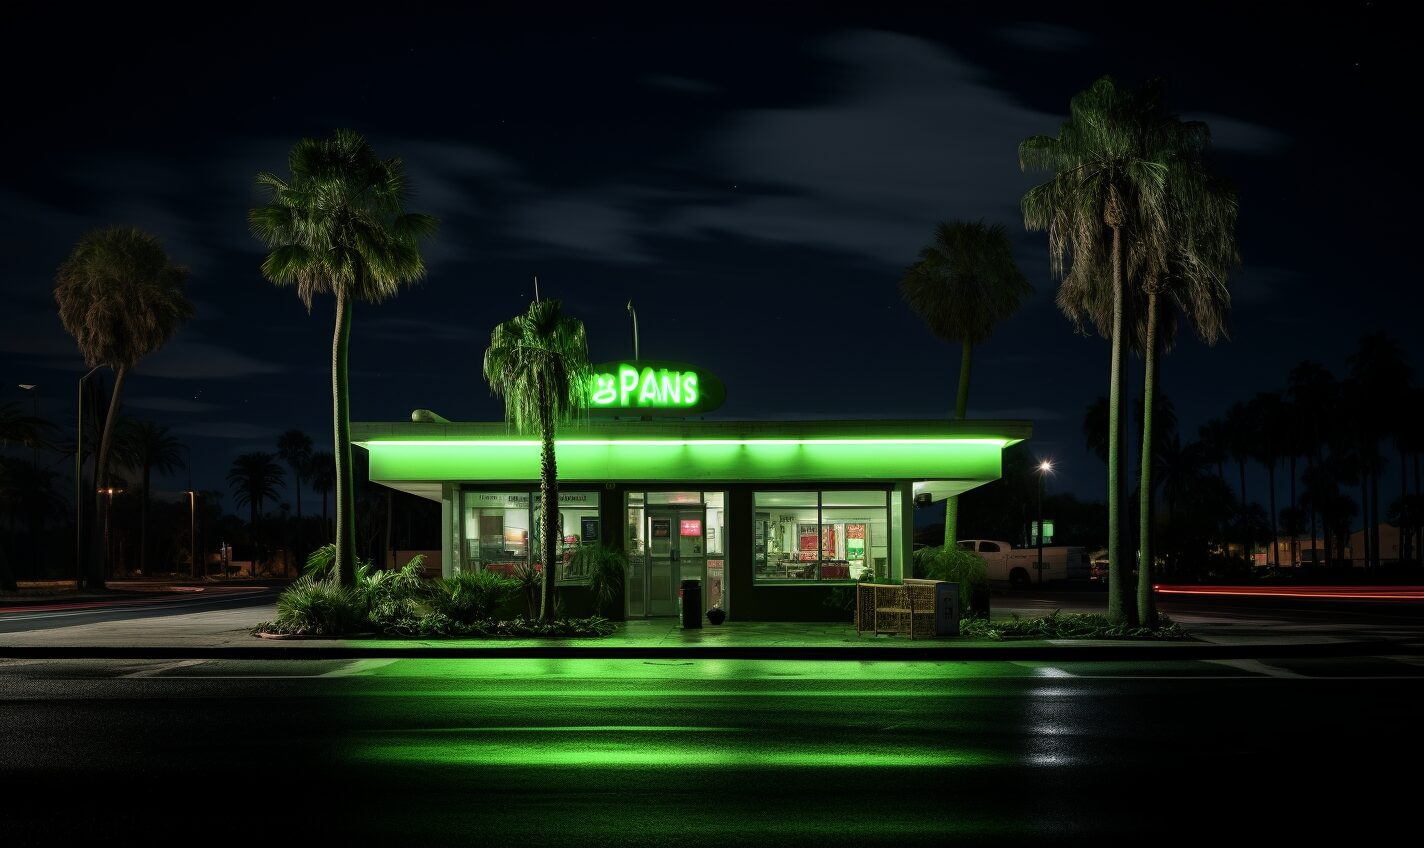 tampa, florida in black and neon green glow